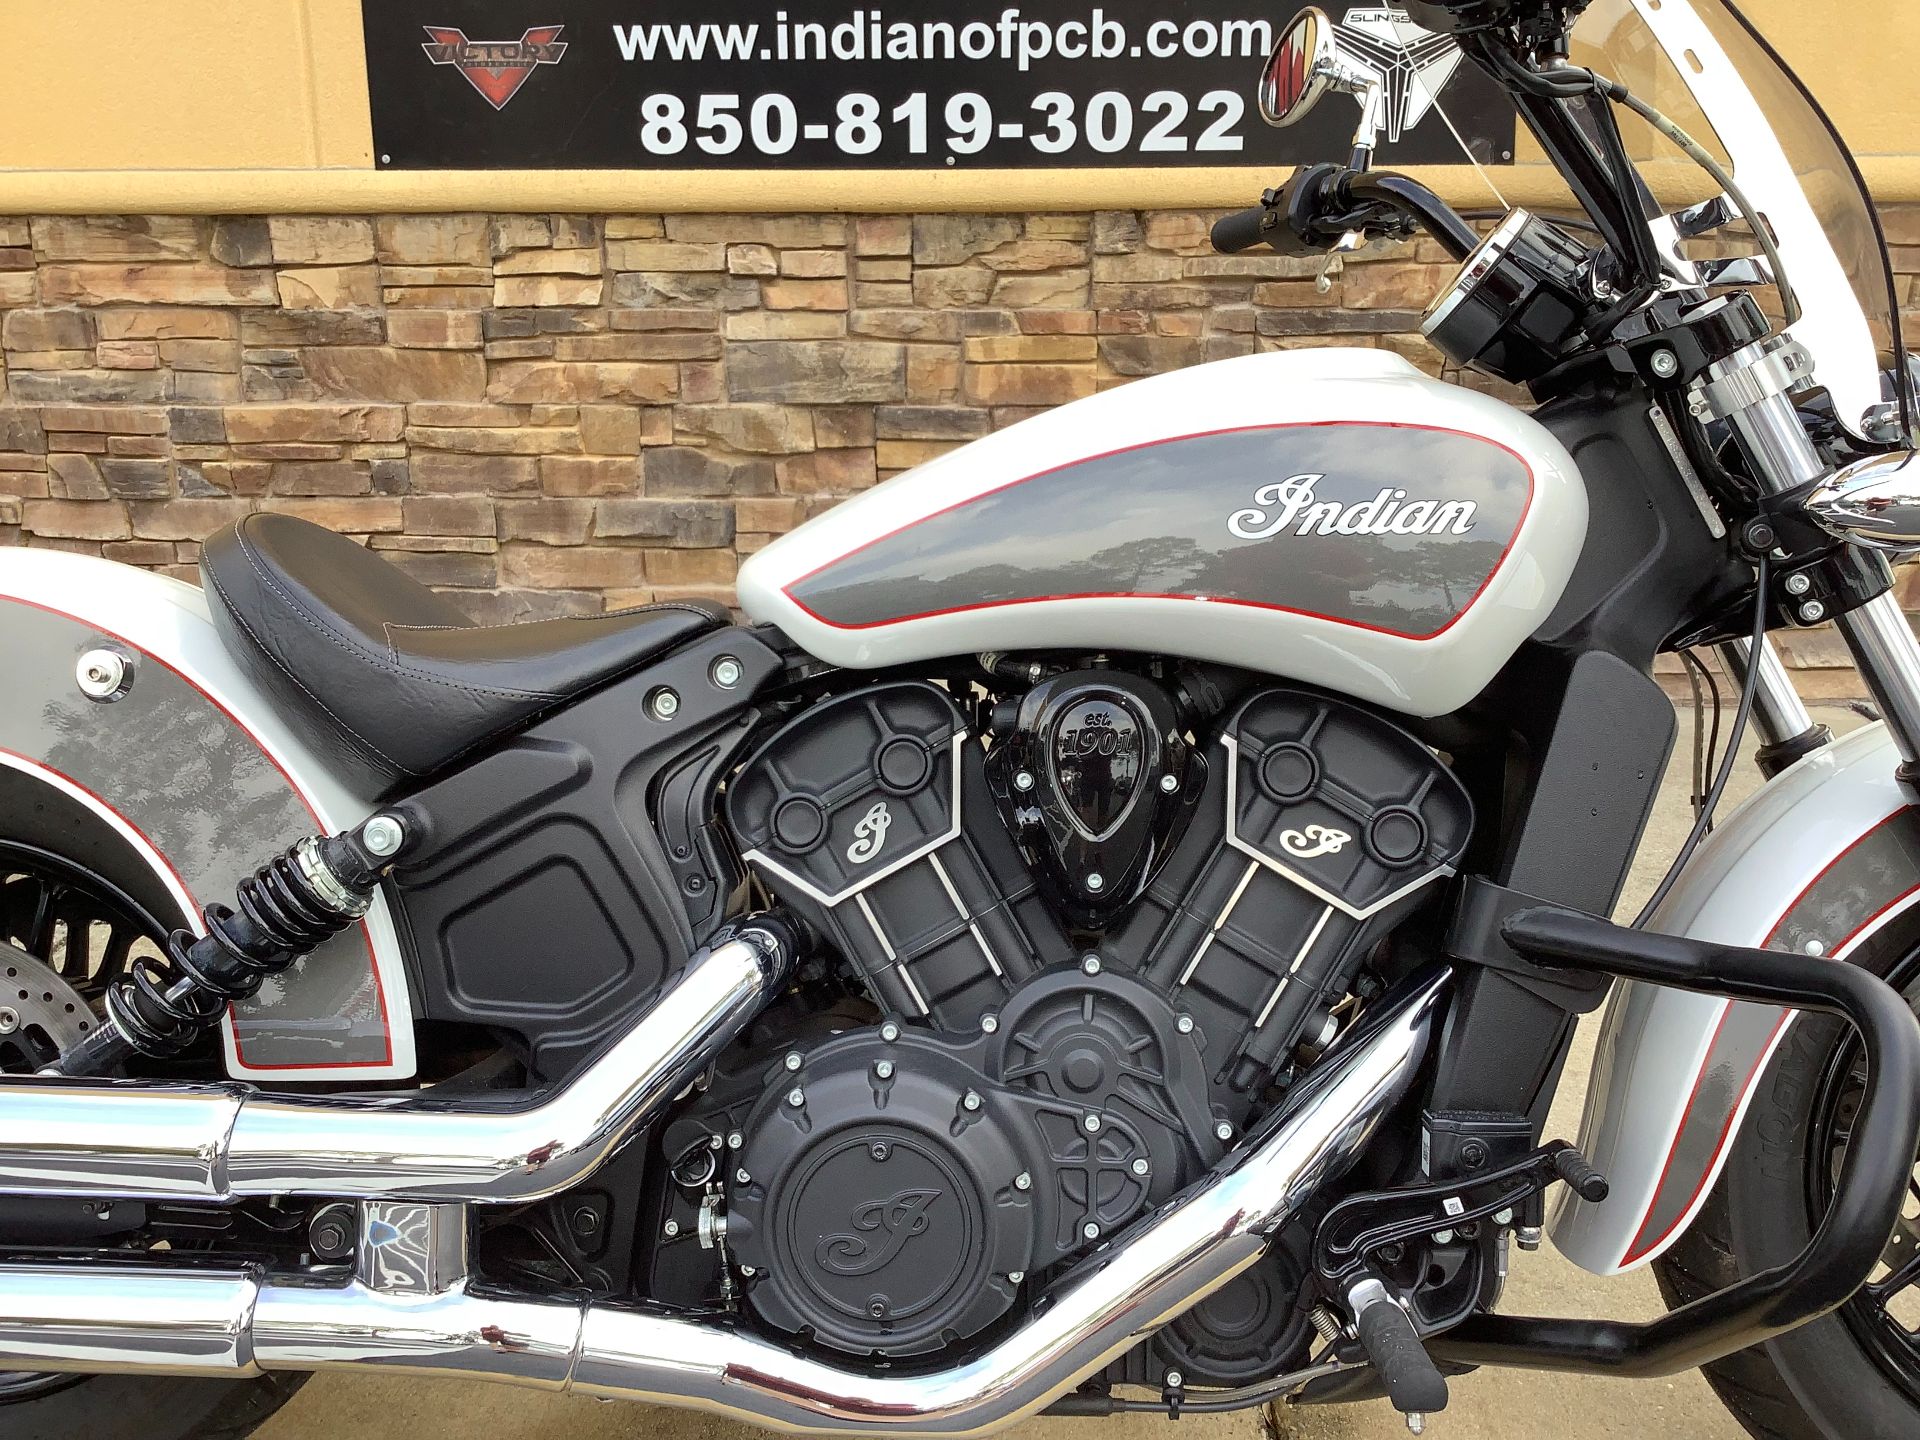 2020 Indian Motorcycle SCOUT SIXTY ABS in Panama City Beach, Florida - Photo 7